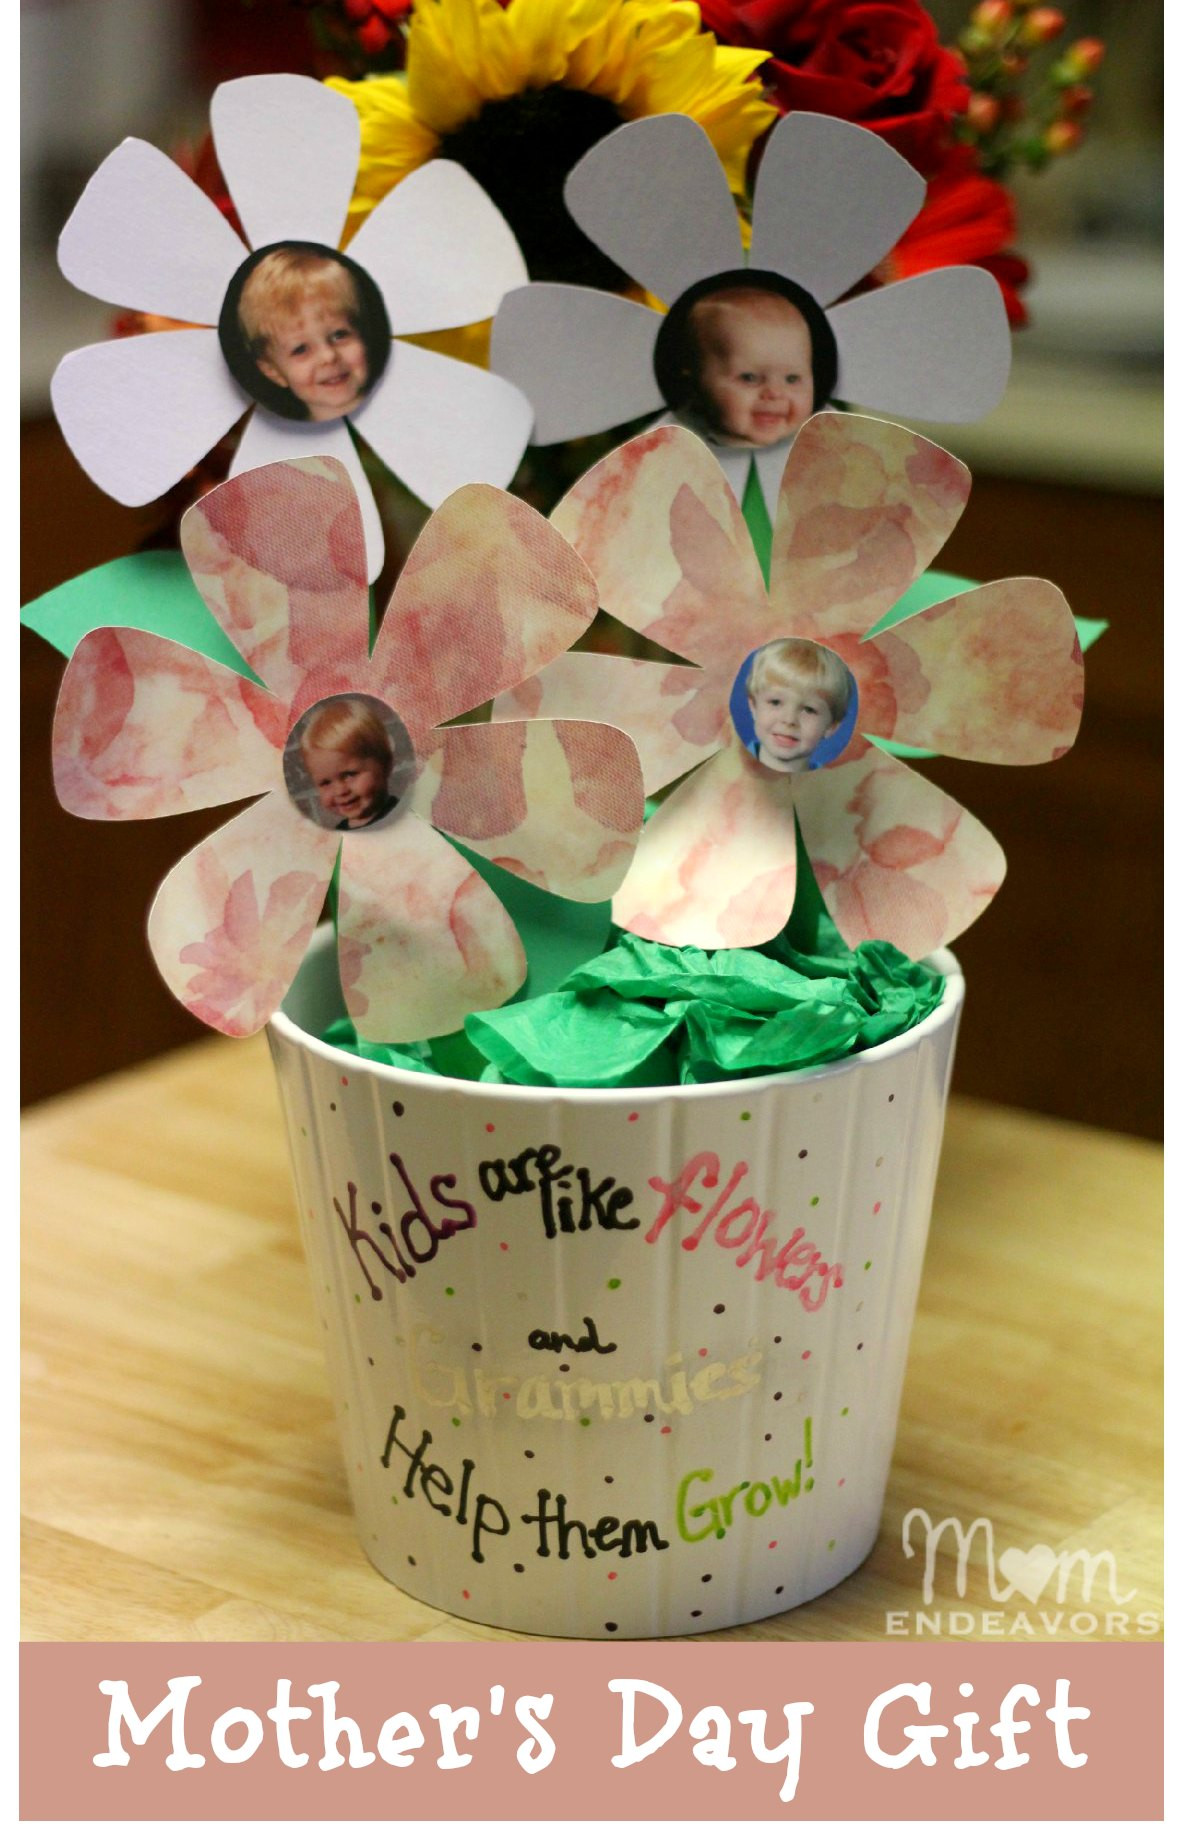 Mother Day Gift Ideas Homemade
 How to Choose a Meaningful Mother’s Day Gift